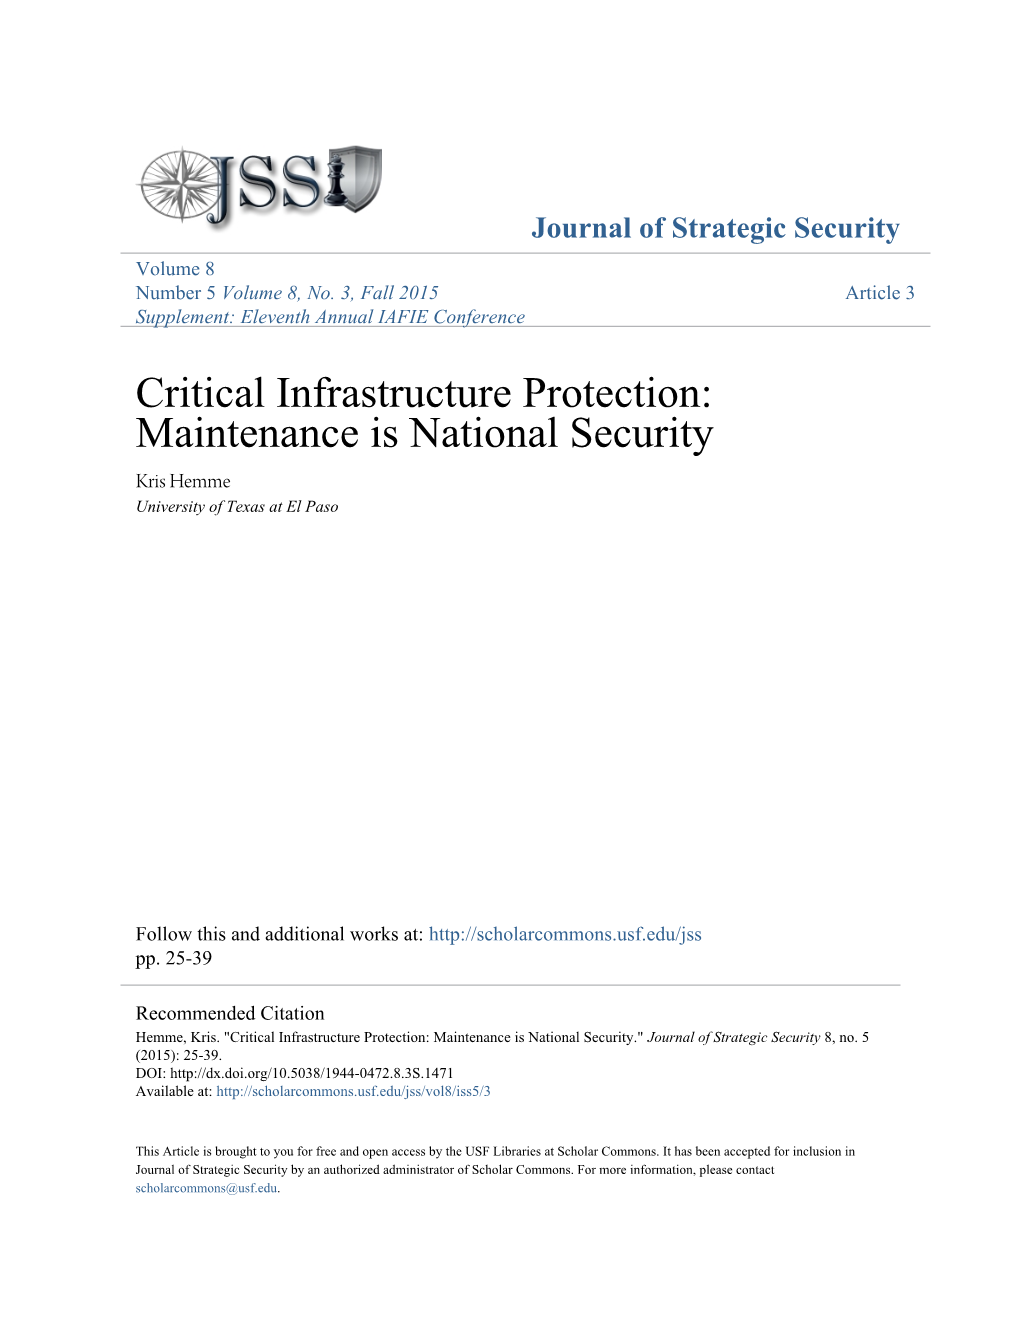 Critical Infrastructure Protection: Maintenance Is National Security Kris Hemme University of Texas at El Paso